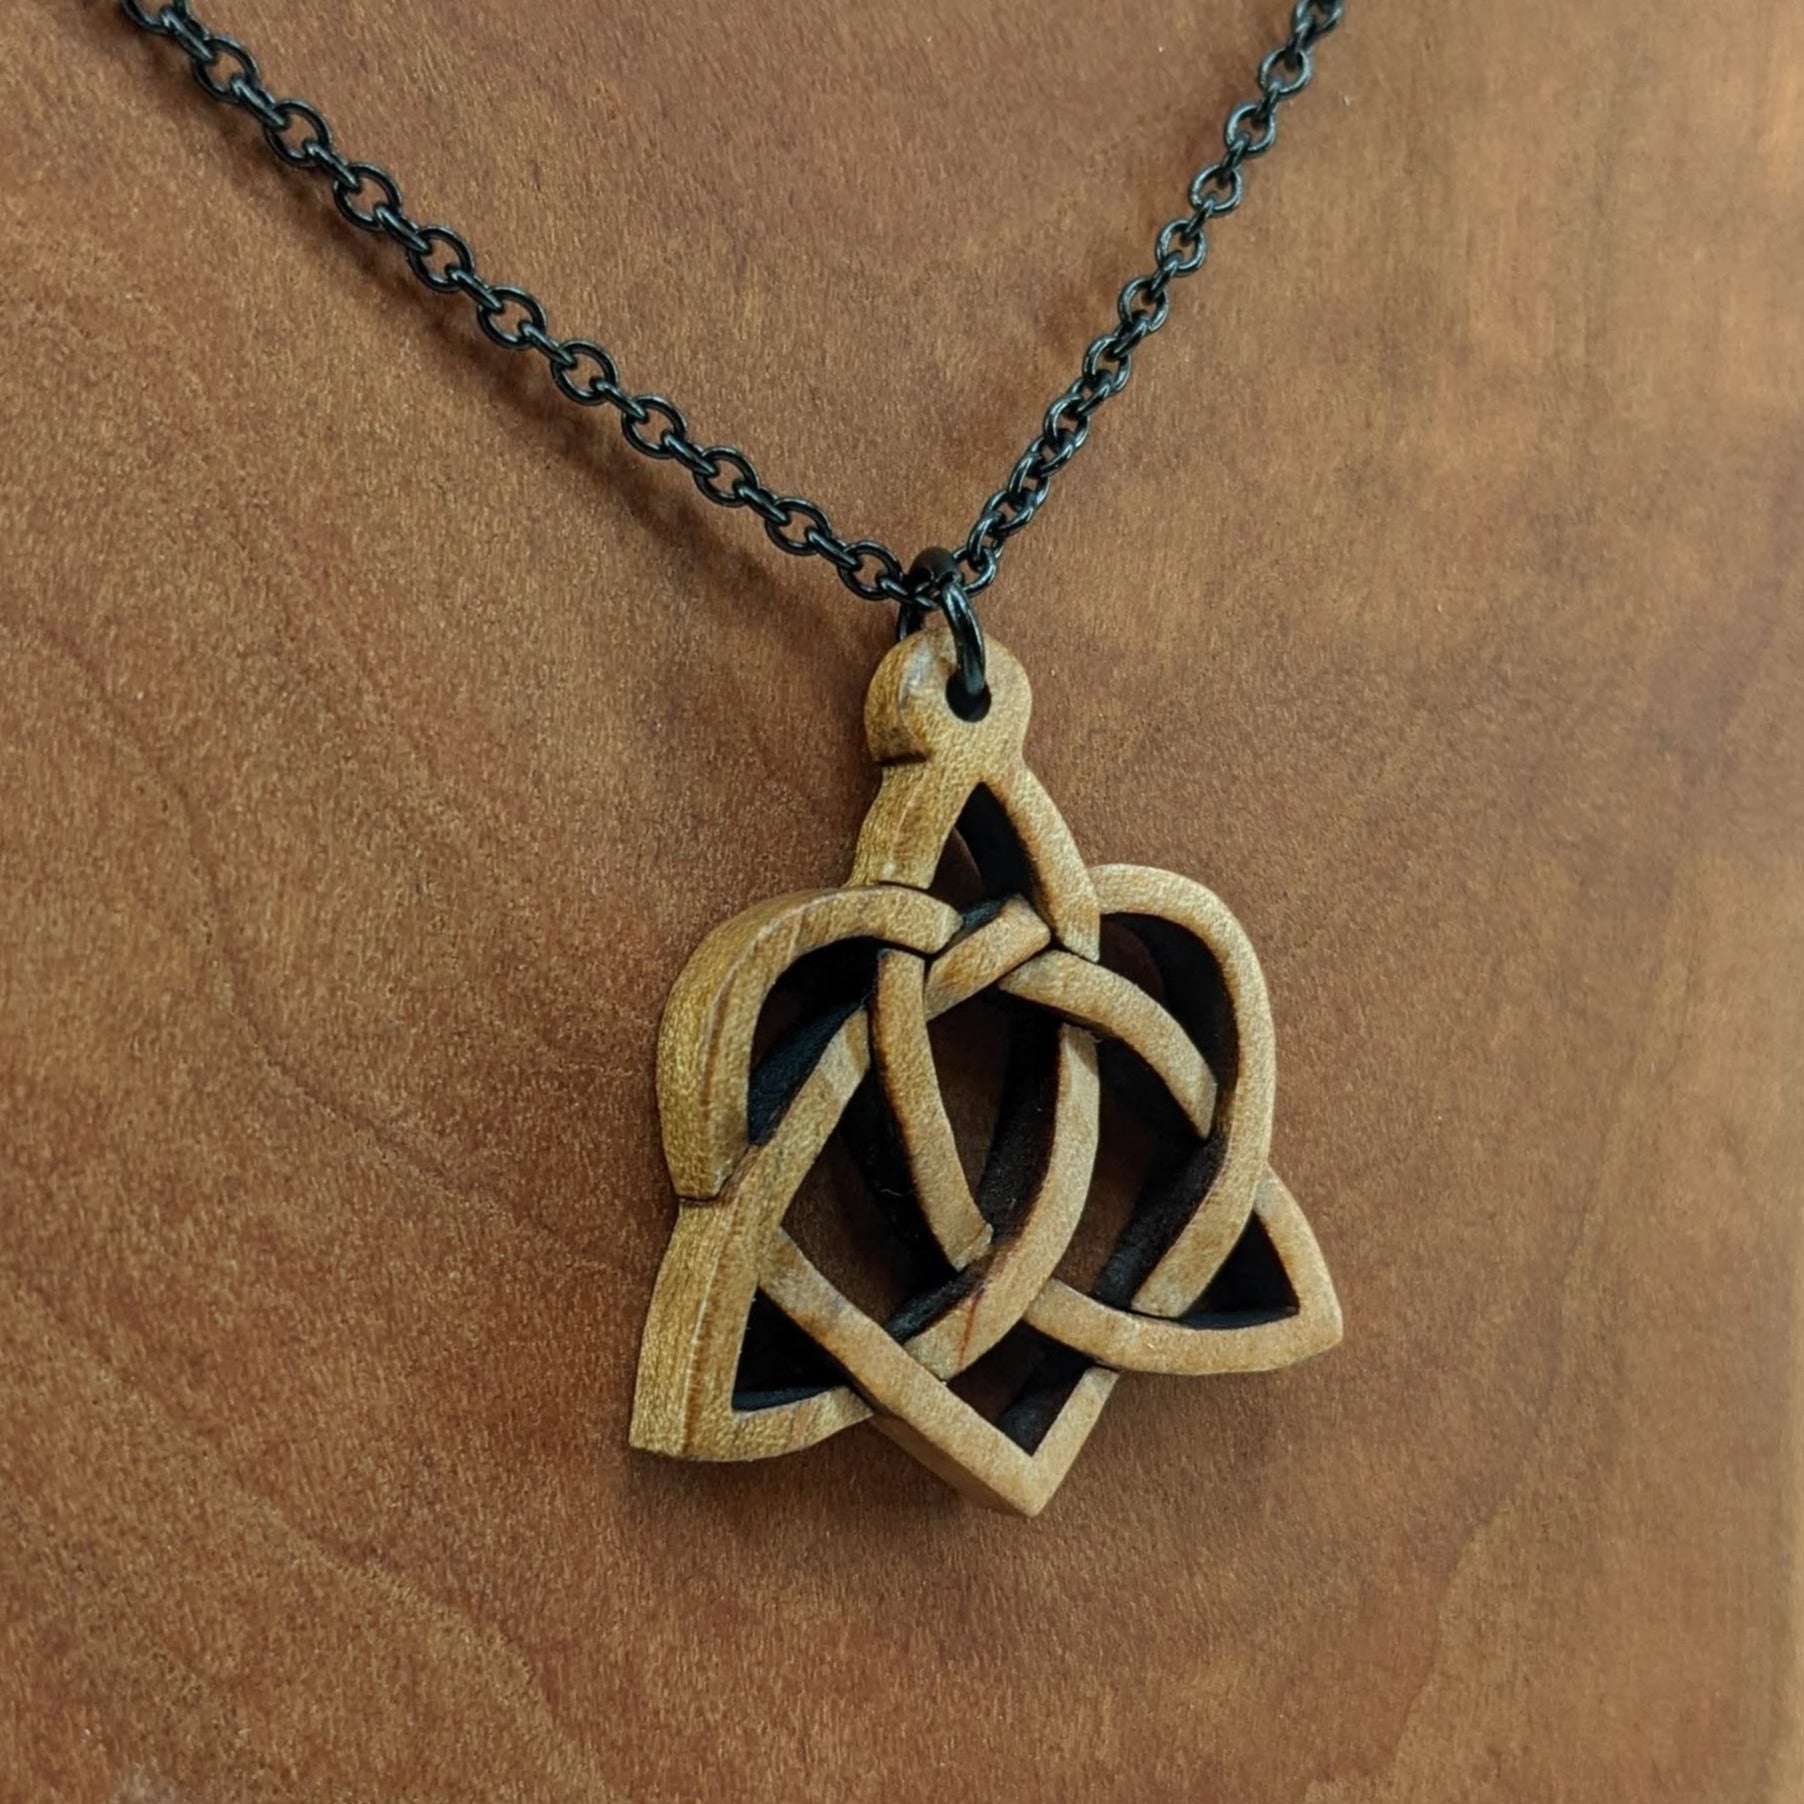 Wooden necklace pendant created in the style of a Celtic weave pattern that is a trinity and heart combined. The symbol represents adoption. Hanging from a black stainless steel chain against a cherry wood background.